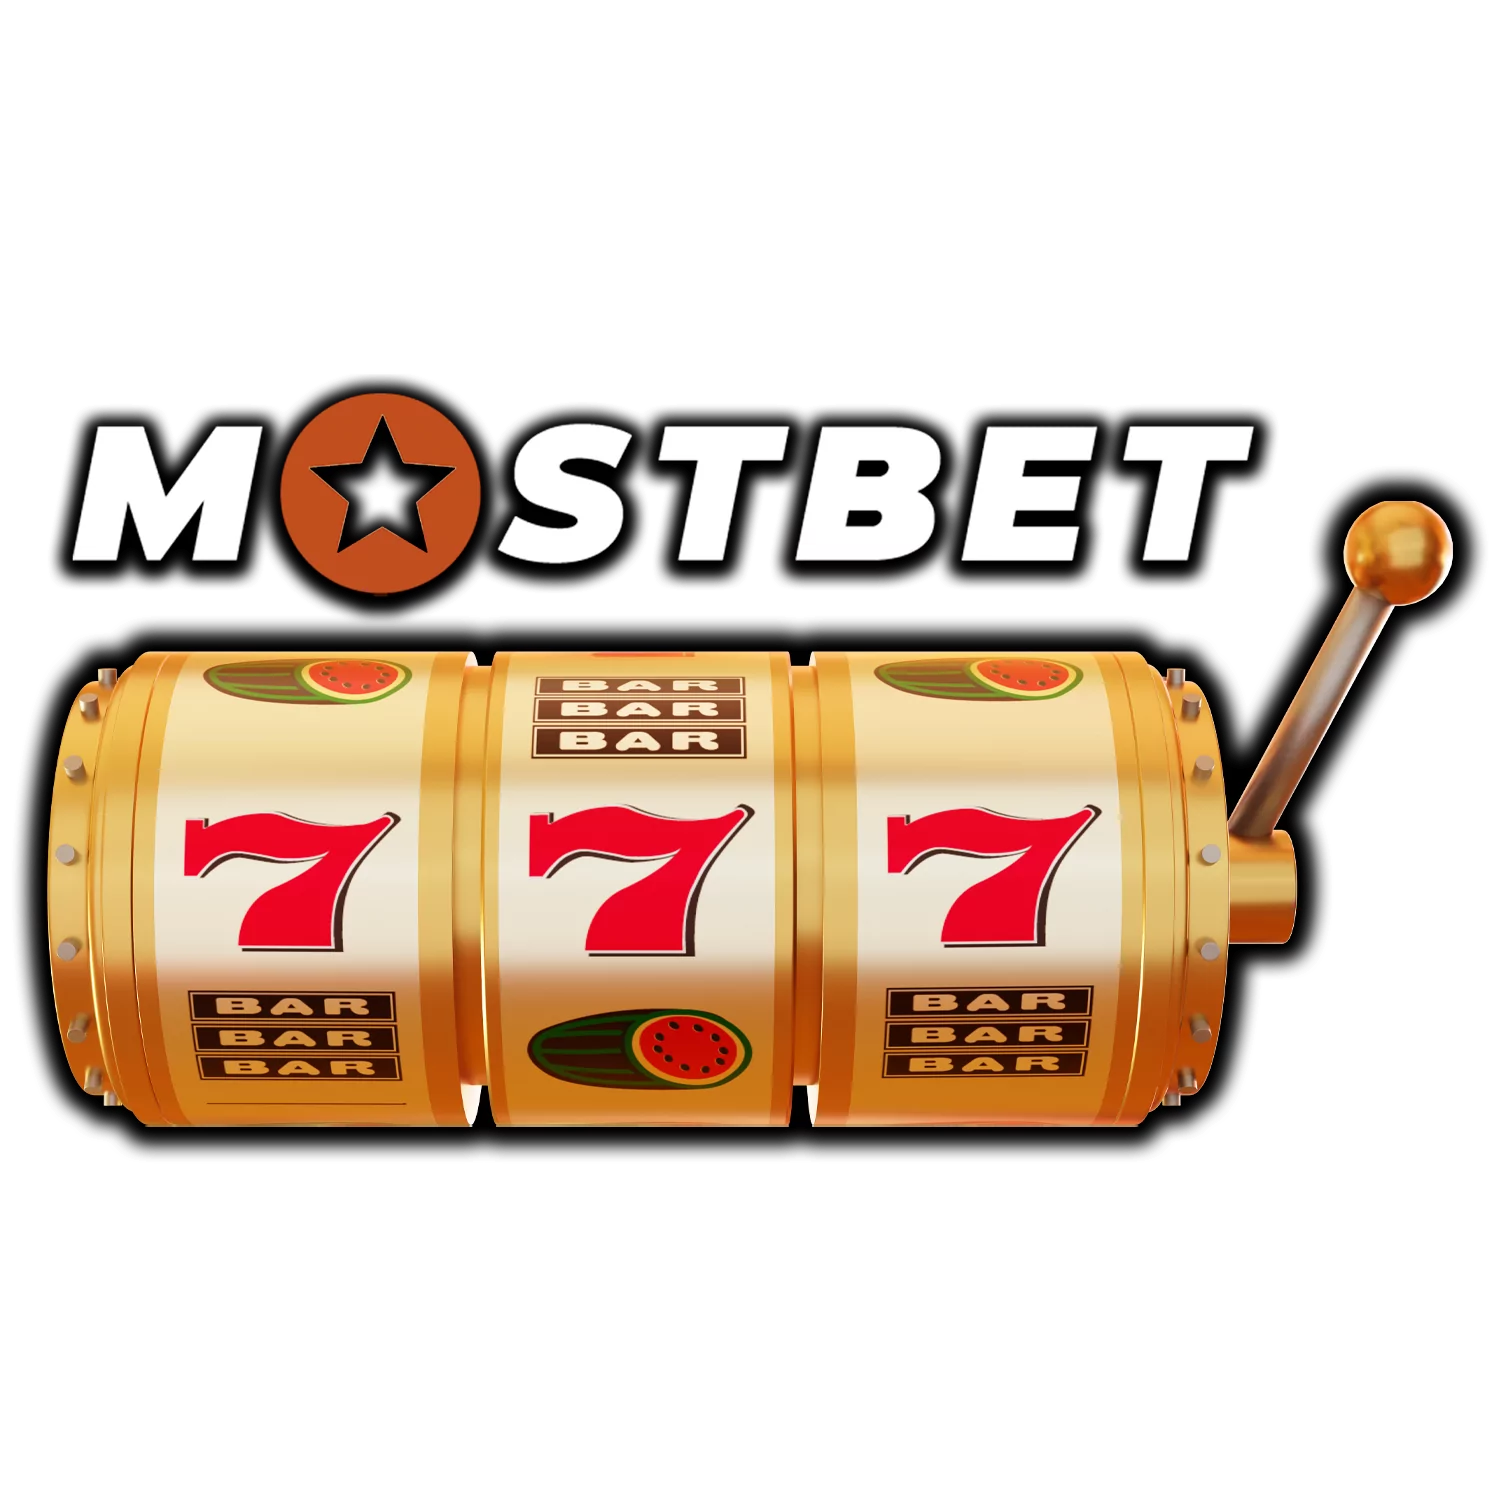 Learn more about playing slots on the Mostbet site and in the app.